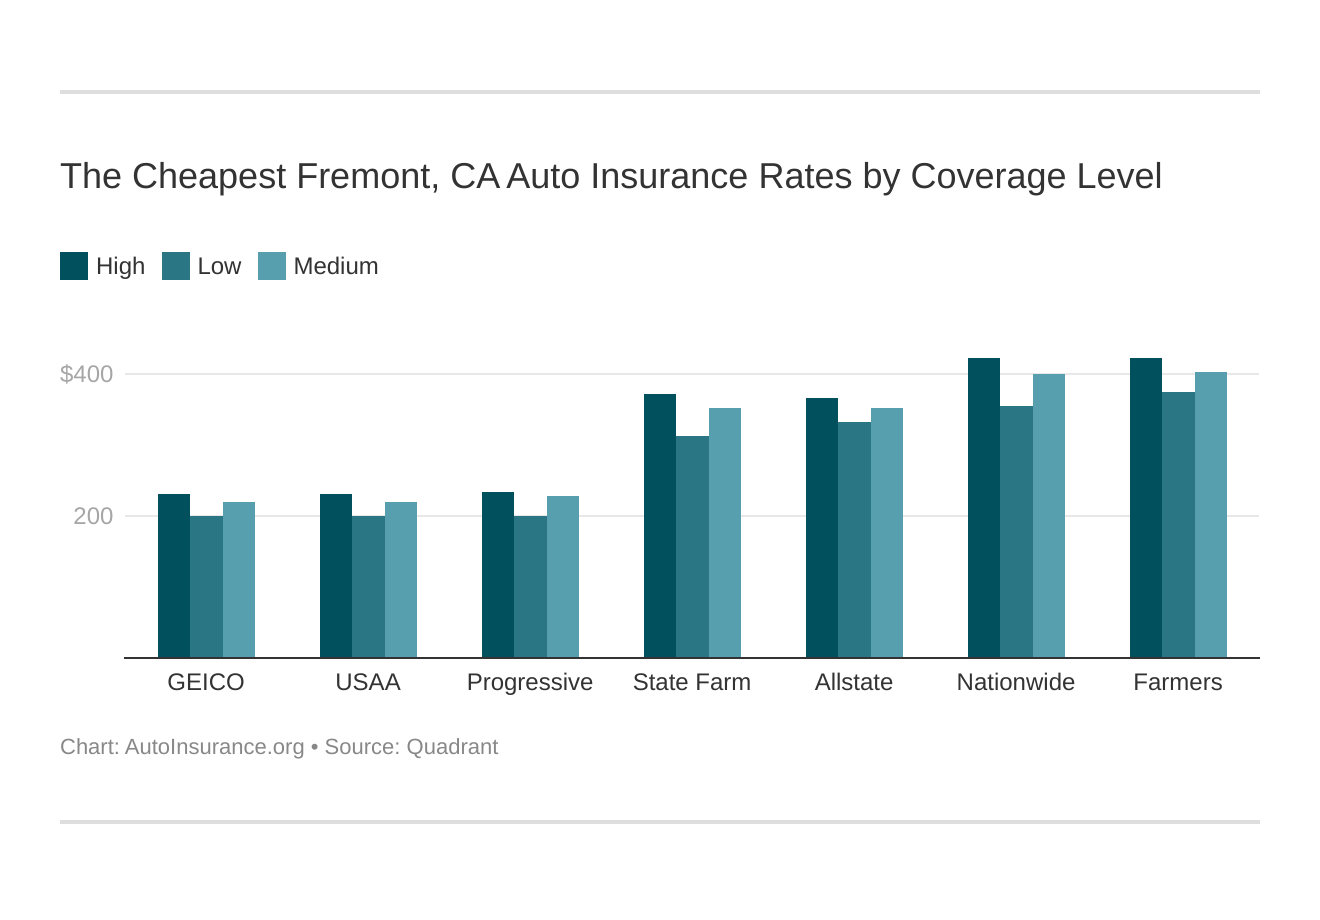 The Cheapest Fremont, CA Auto Insurance Rates by Coverage Level